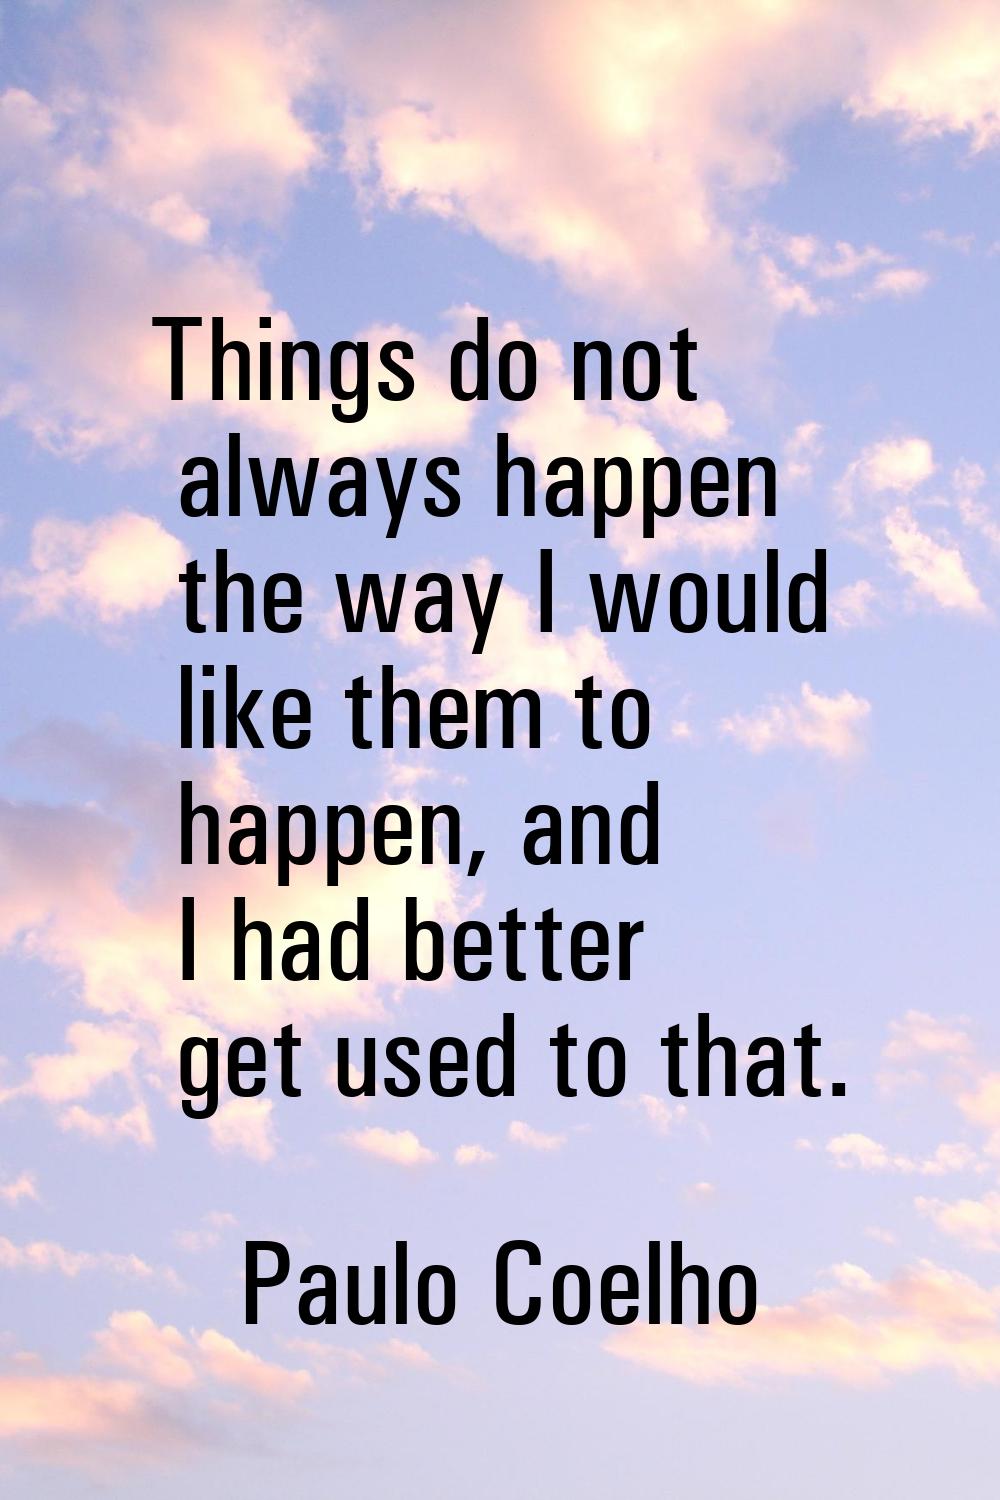 Things do not always happen the way I would like them to happen, and I had better get used to that.